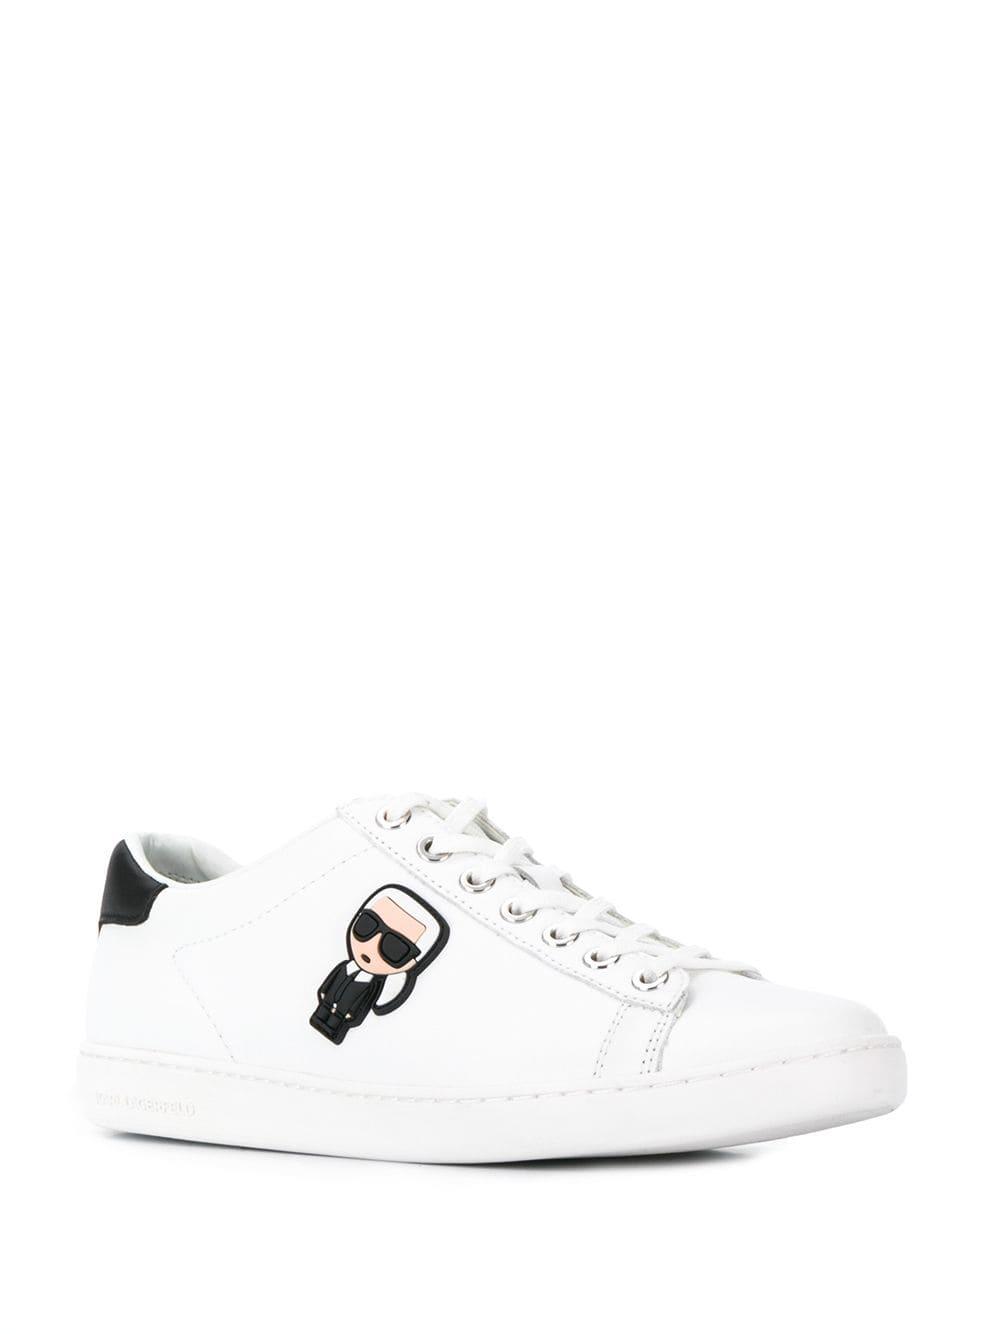 Karl Lagerfeld Leather Iconic Cupsole Sneakers in White - Lyst